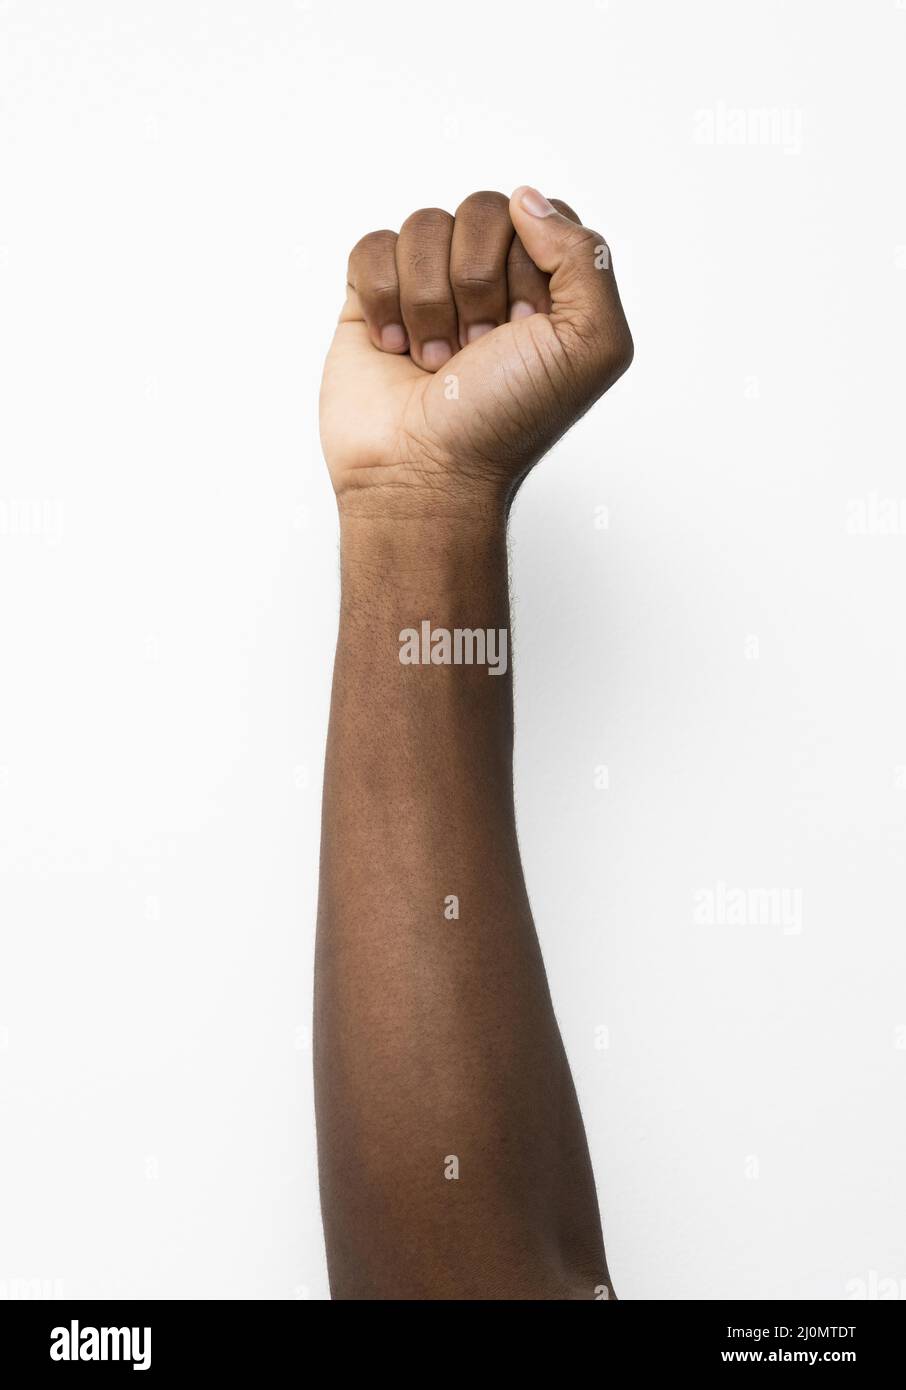 Black person holding fist up Stock Photo